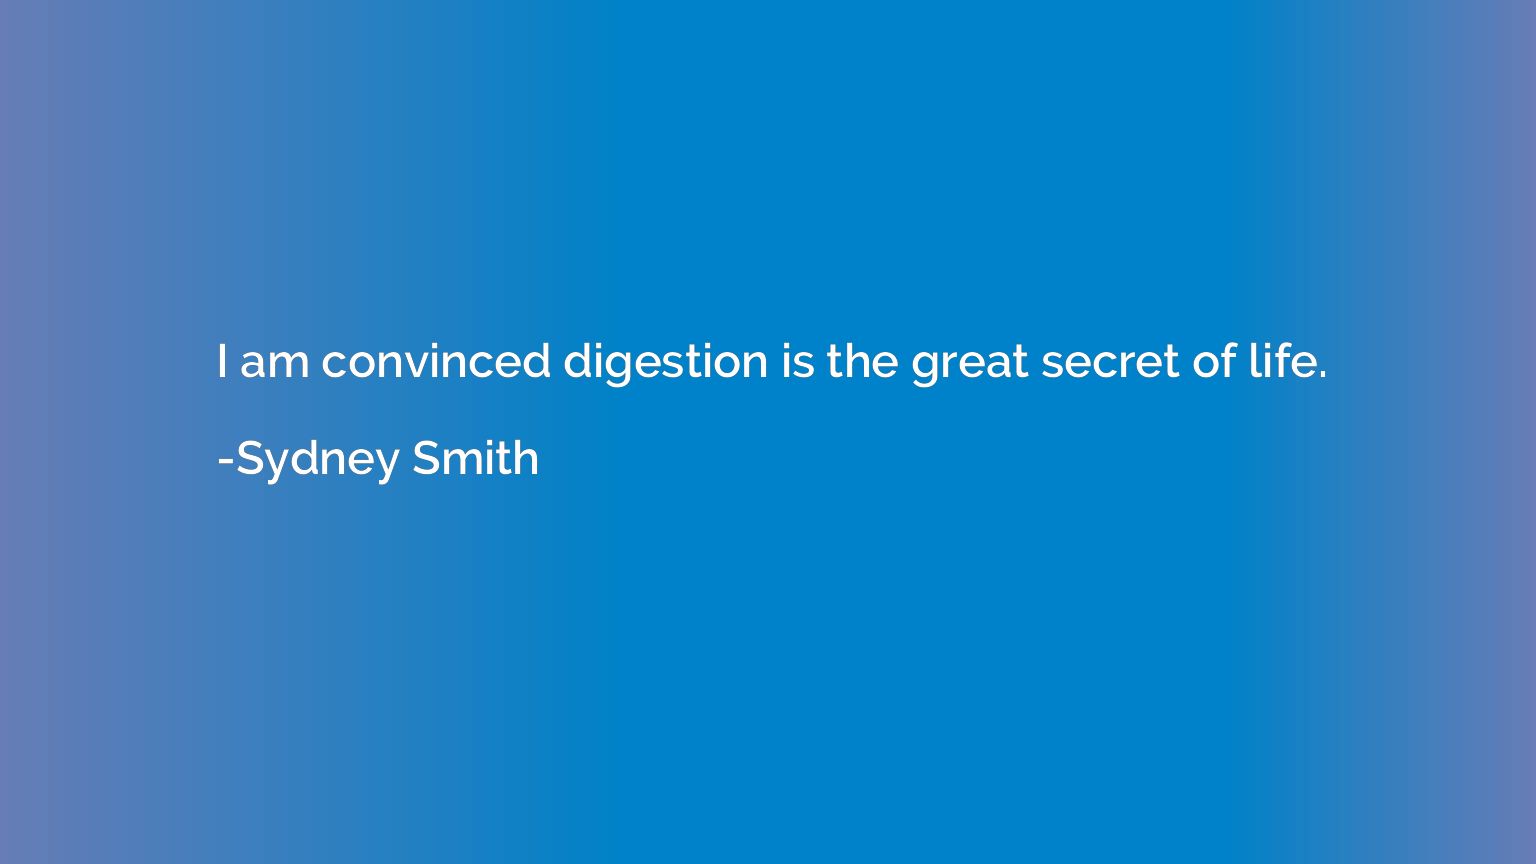 I am convinced digestion is the great secret of life.